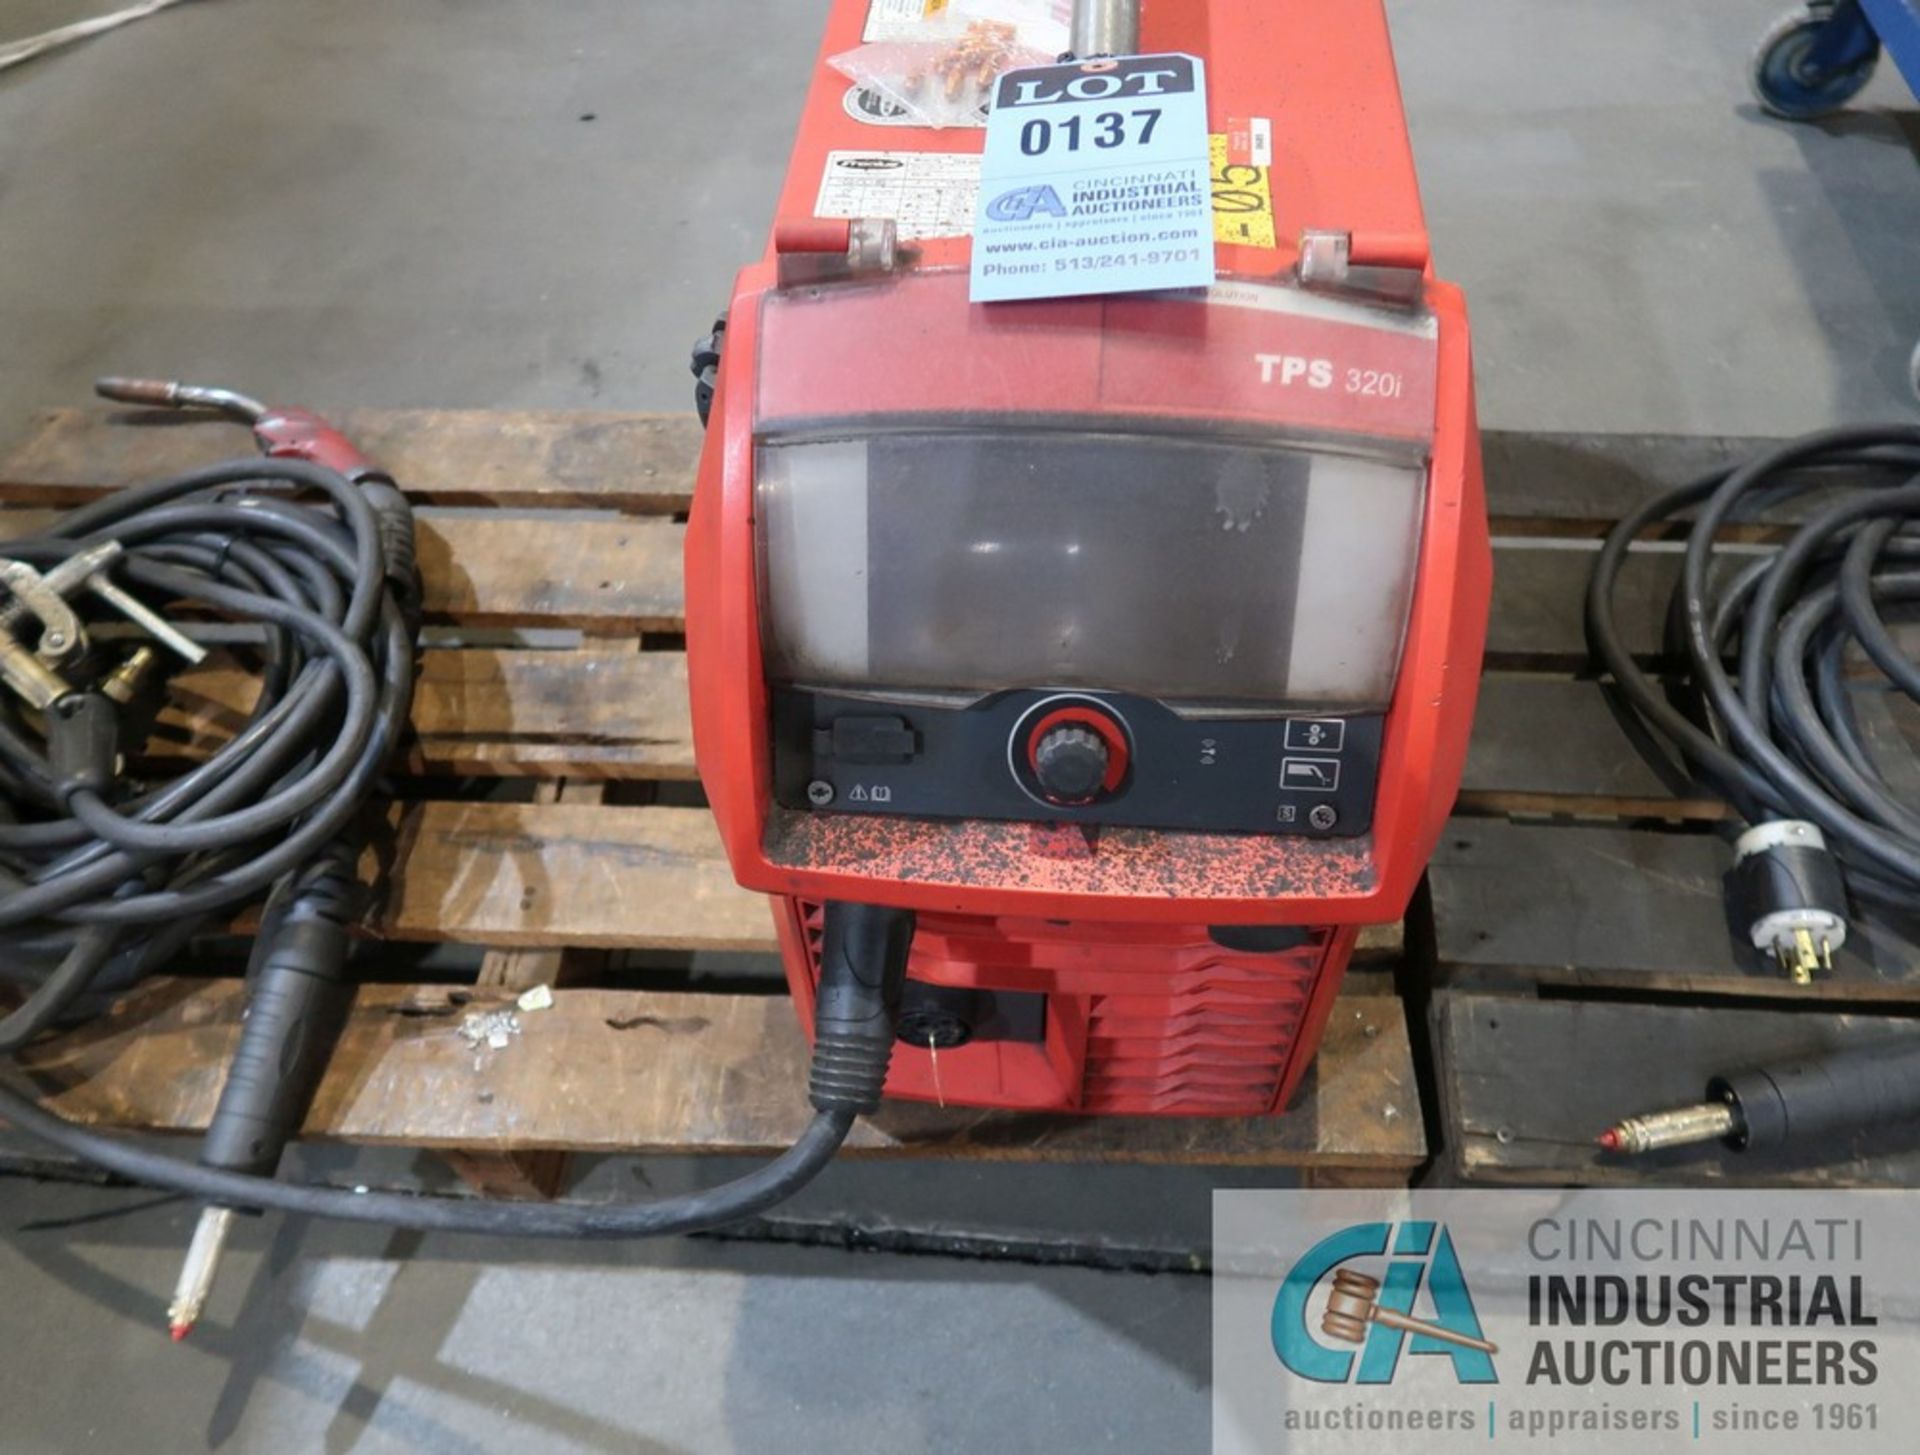 320 AMP FRONIUS MODEL TPS320i WELDING POWER SOURCE WITH BUILT IN WIRE FEEDER; S/N 26285938 - Image 2 of 3